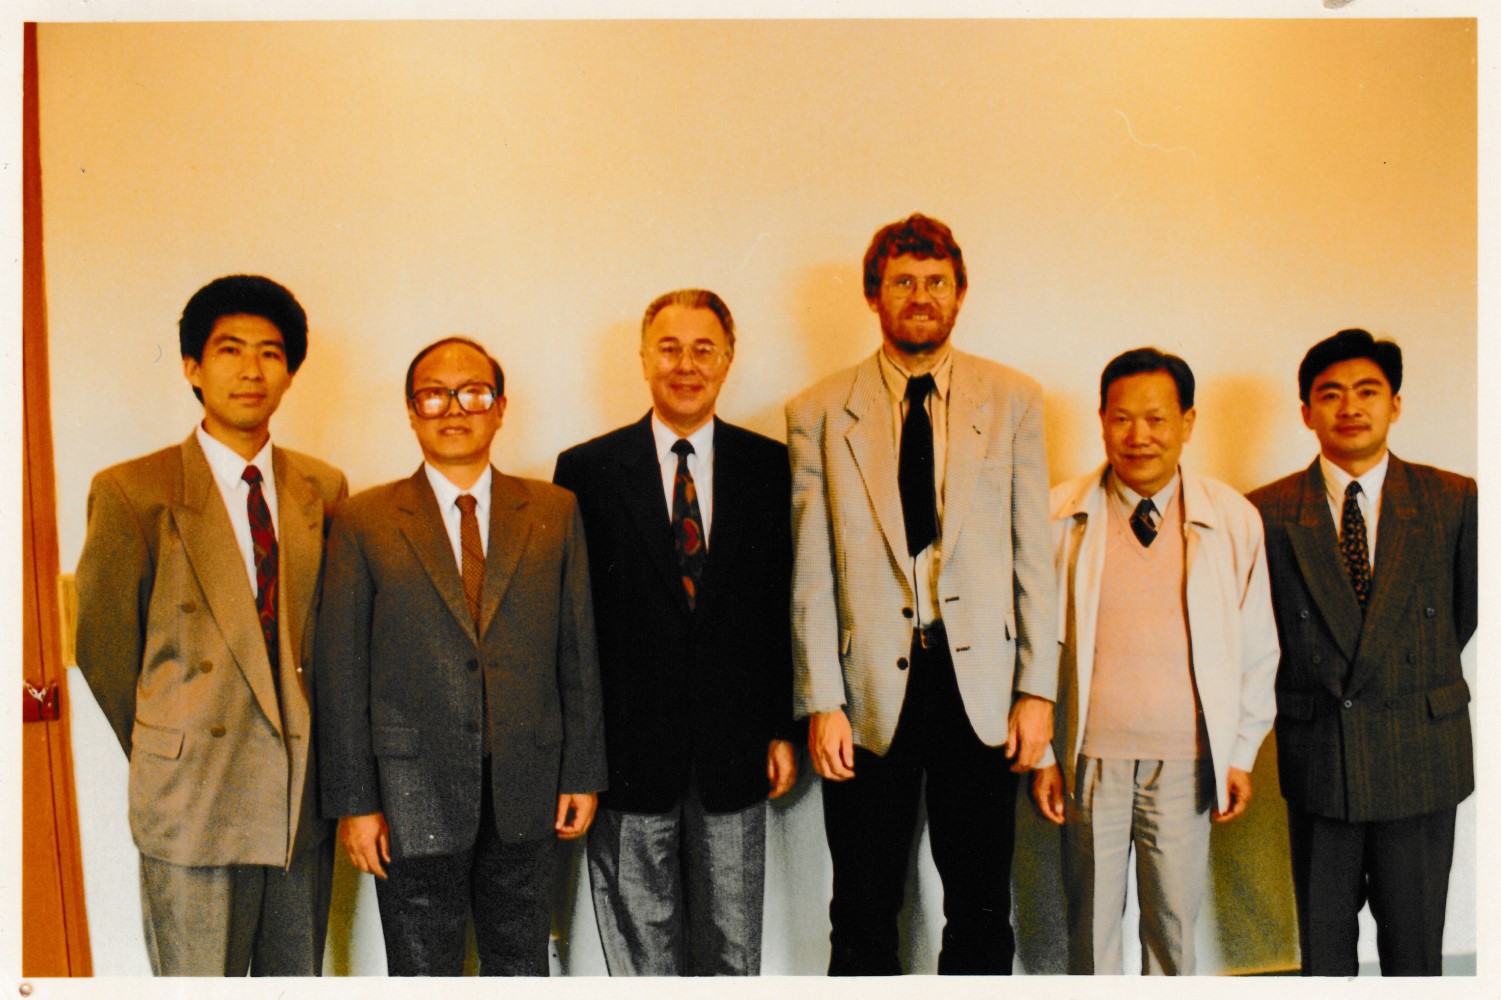 Meeting the leaders of the College of Land Management (part of Nanjing Agricultural University), October 1995.